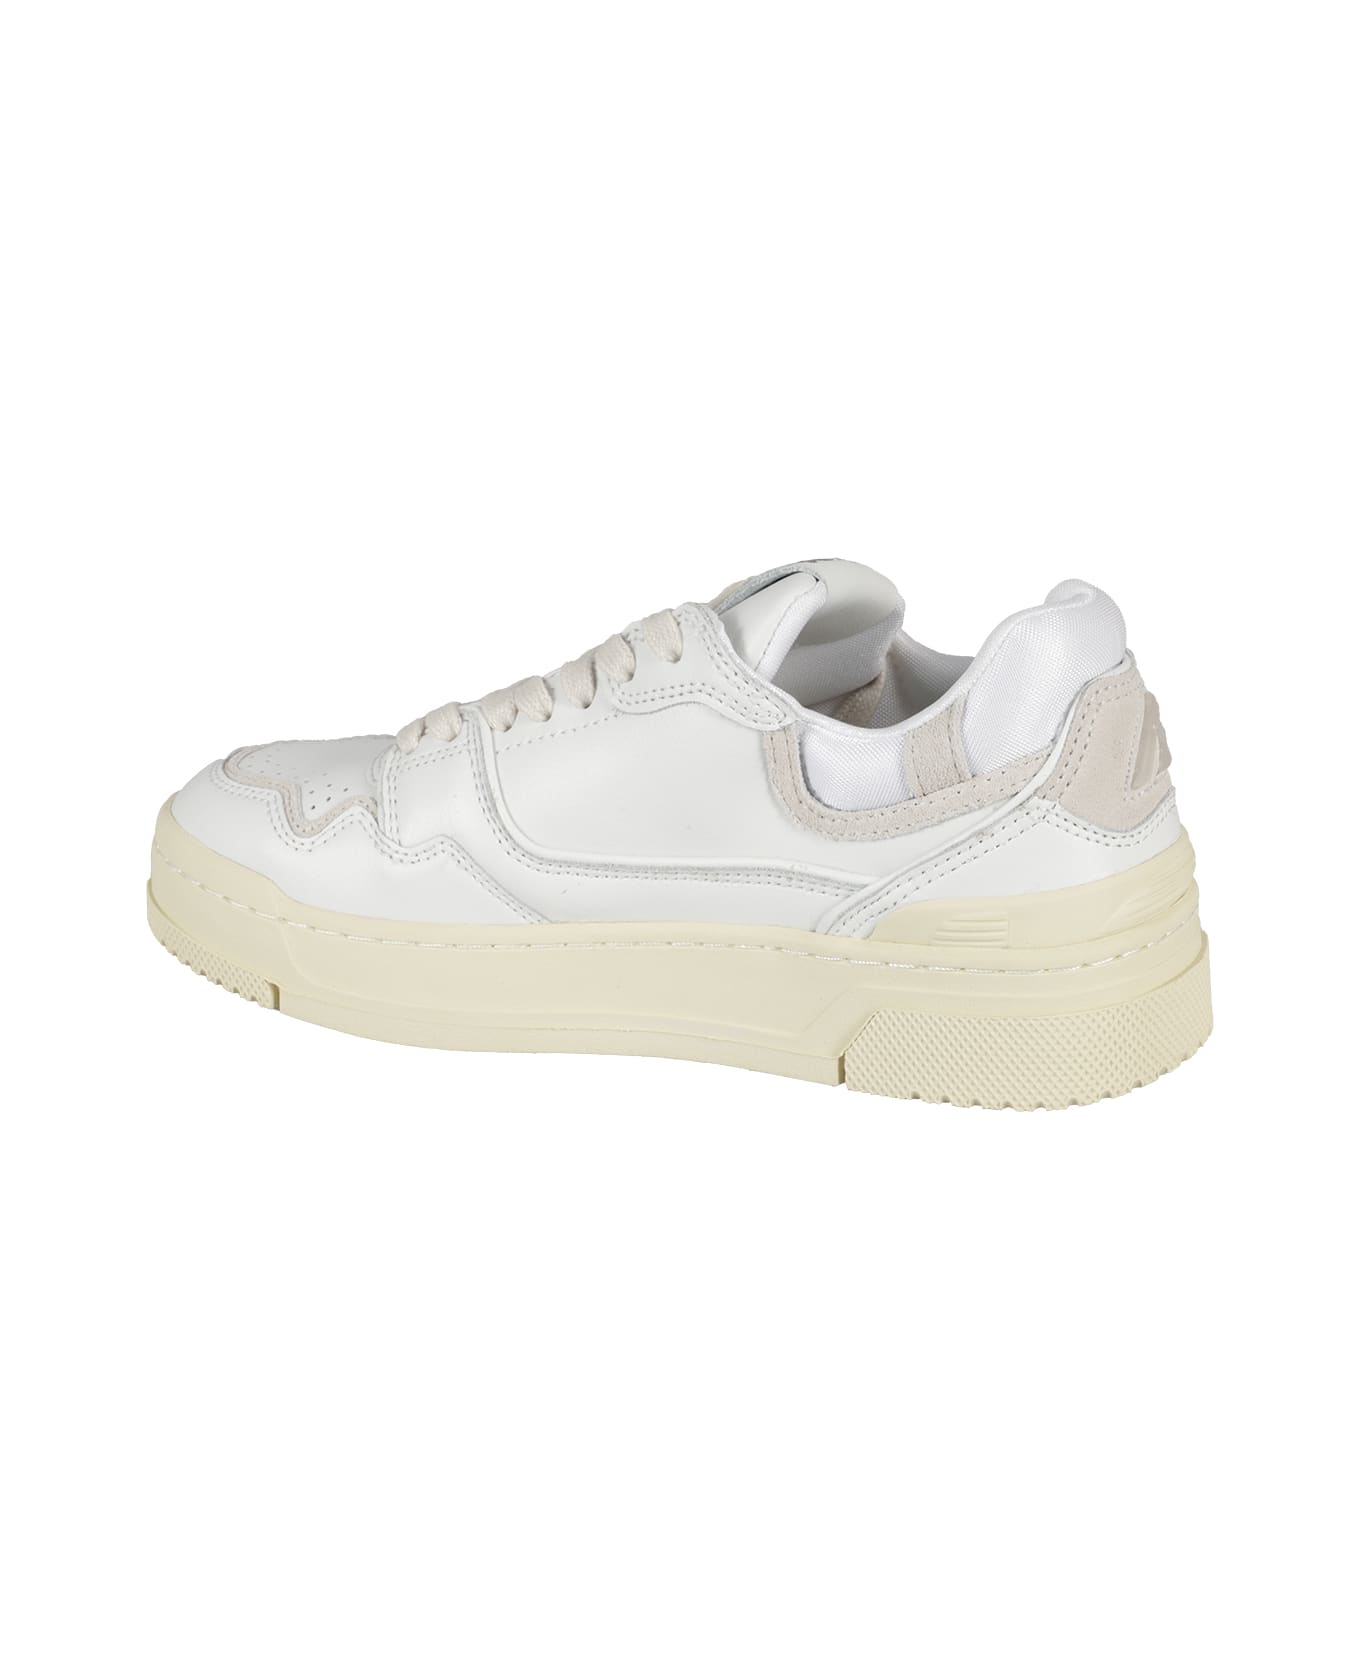 Autry Clc Low Wom - burberry larkhall high eye sneakers